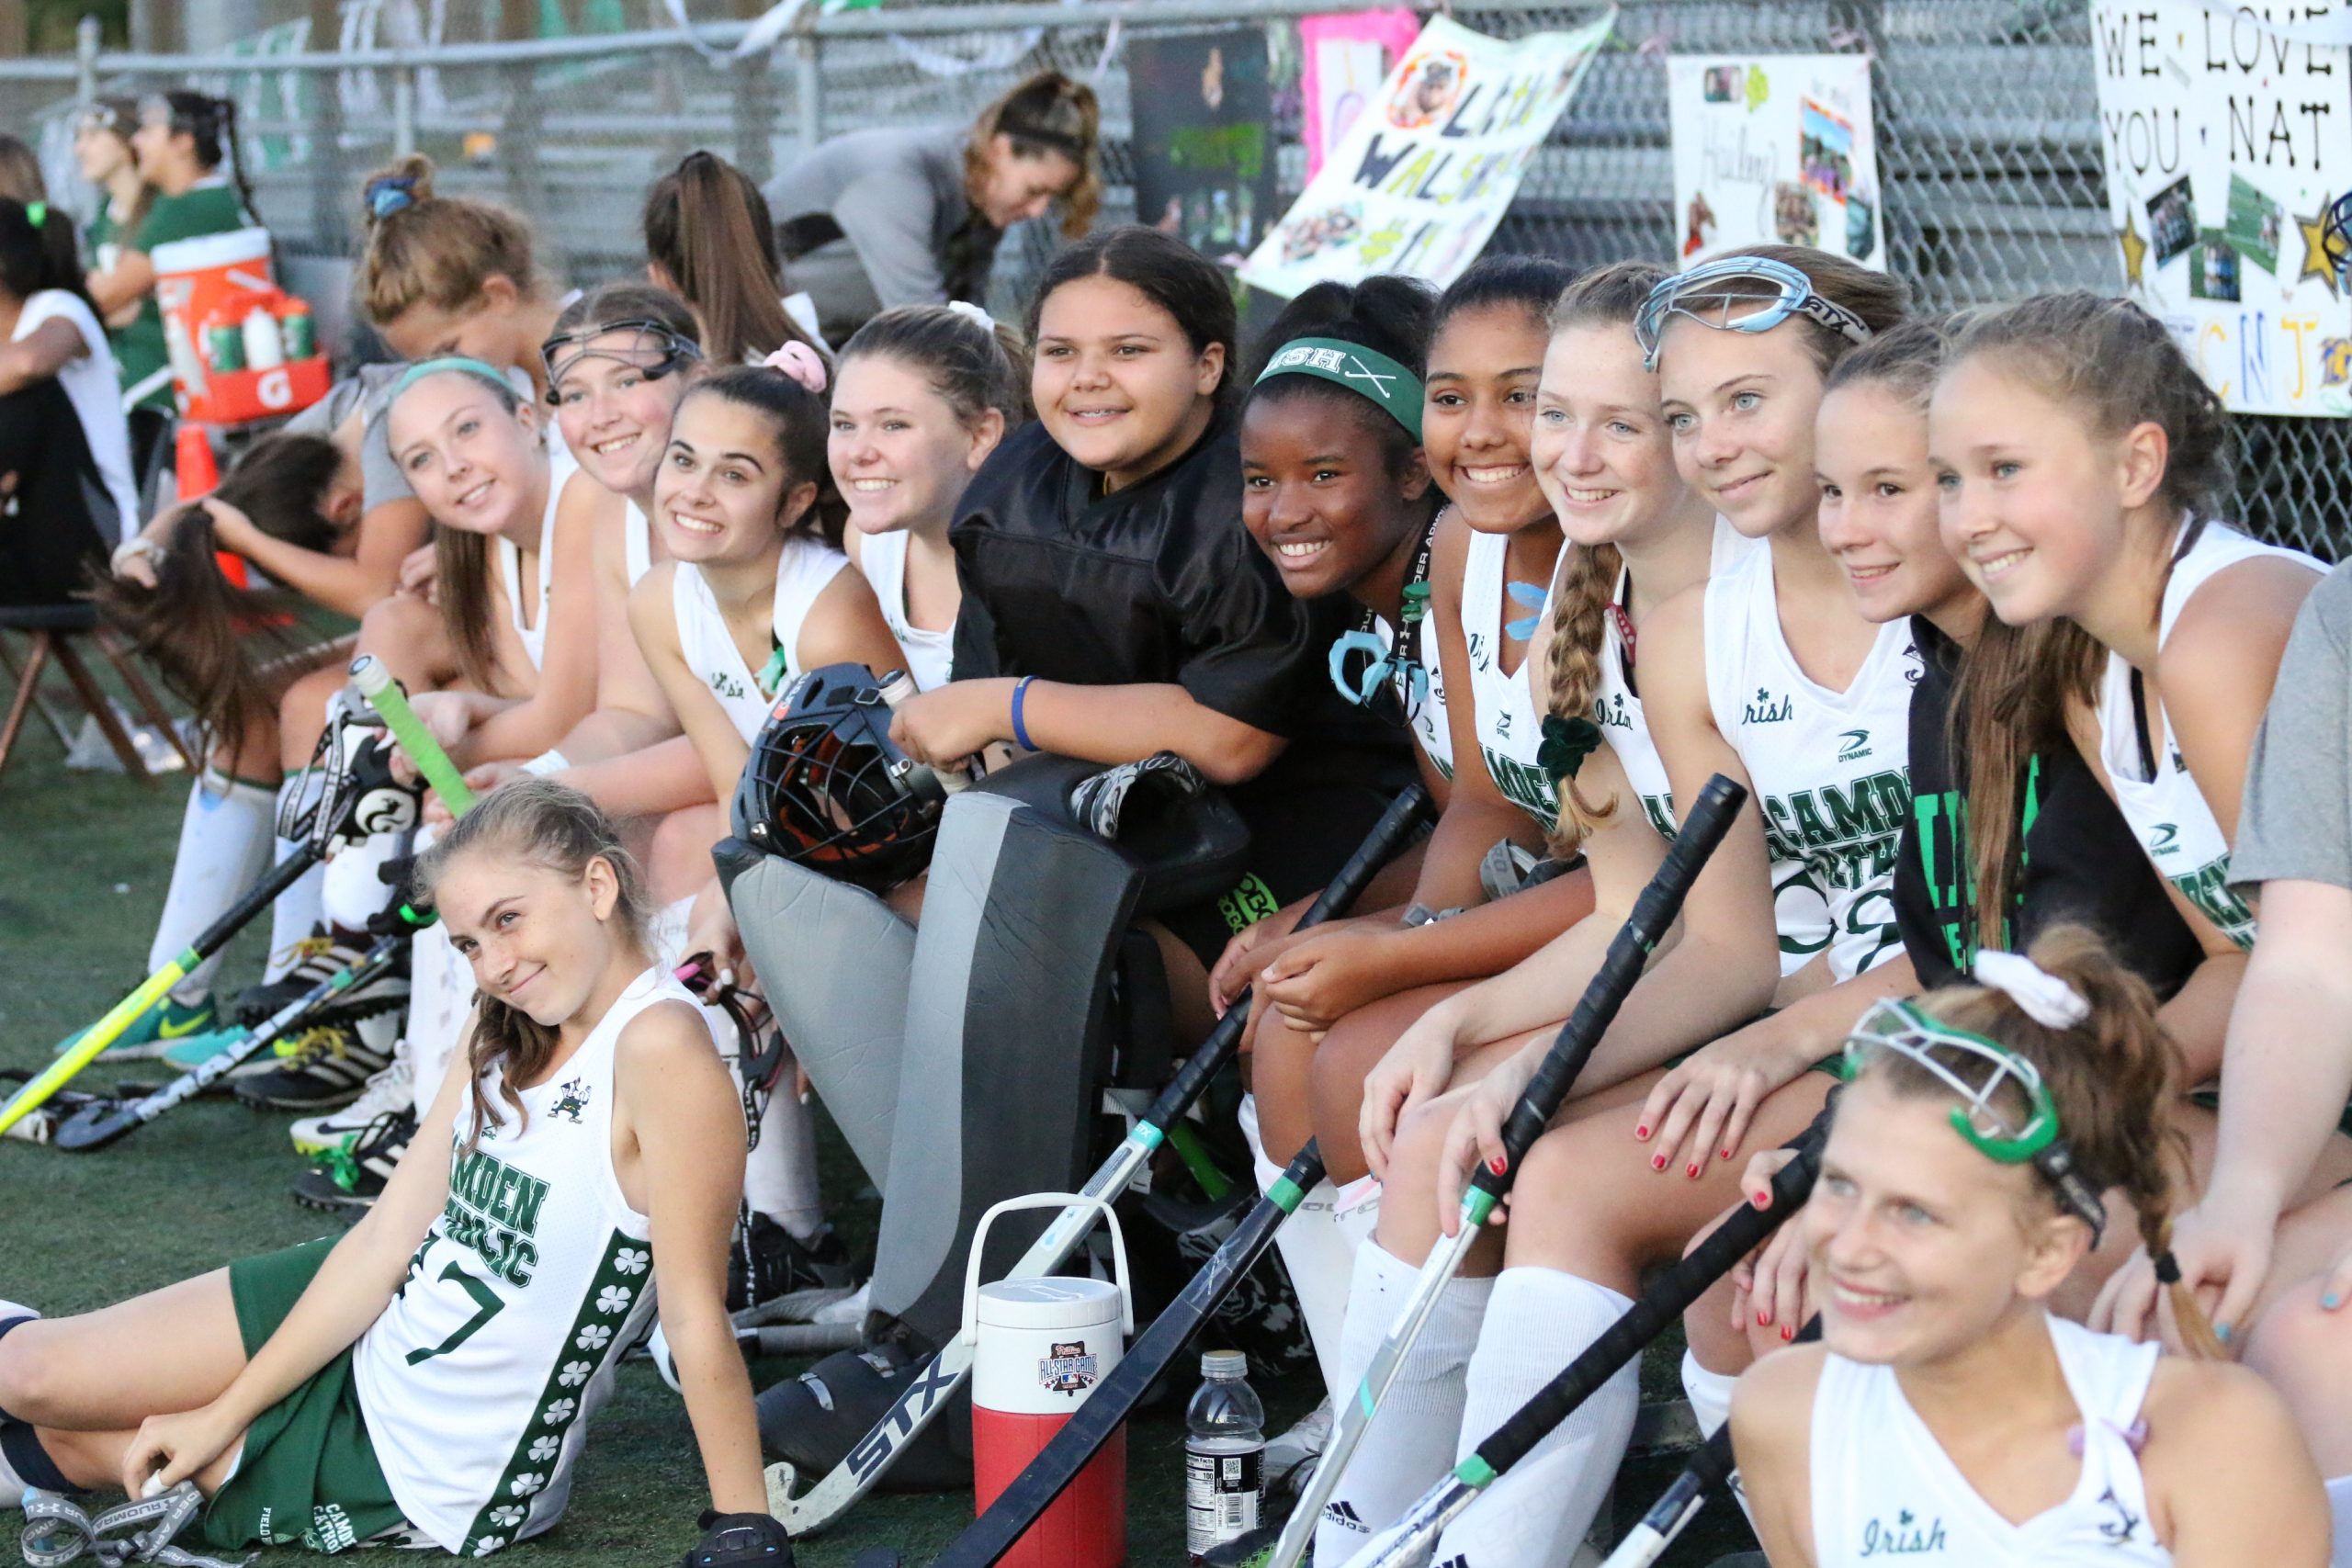 students taking group picture at match of field hockey